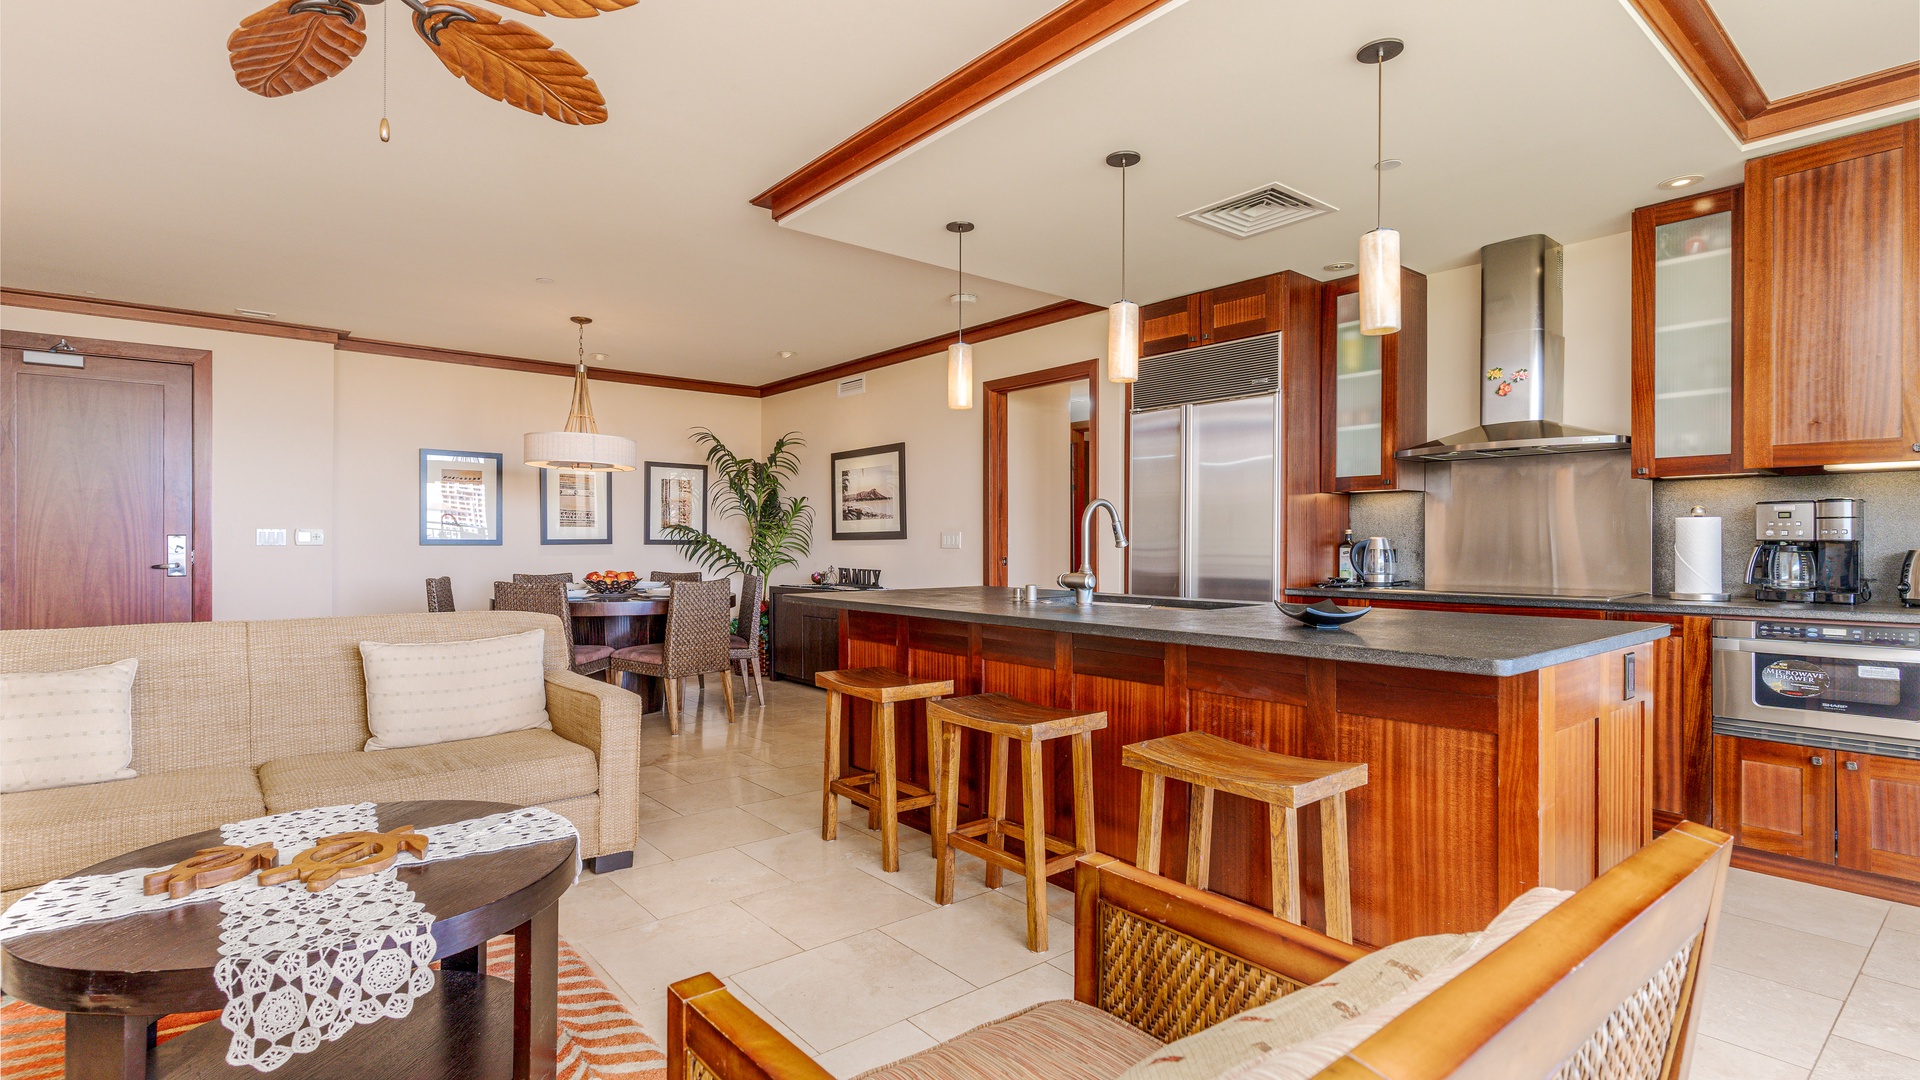 Kapolei Vacation Rentals, Ko Olina Beach Villas B1101 - With kitchen, dining and living, there's enough seating for everyone.